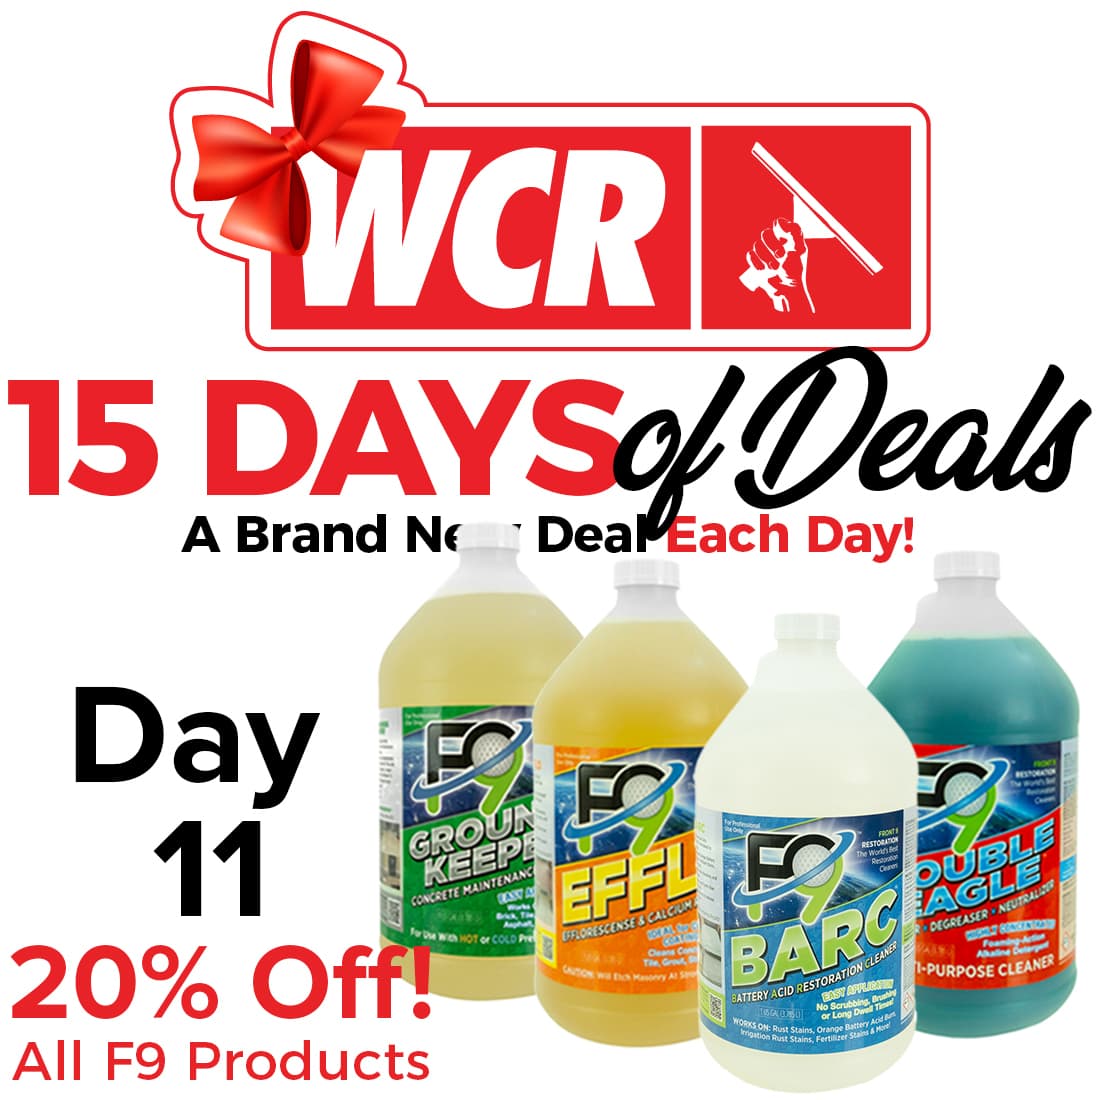 15 Days of Daily Deals Is Back! - Shop WCR - Window Cleaning